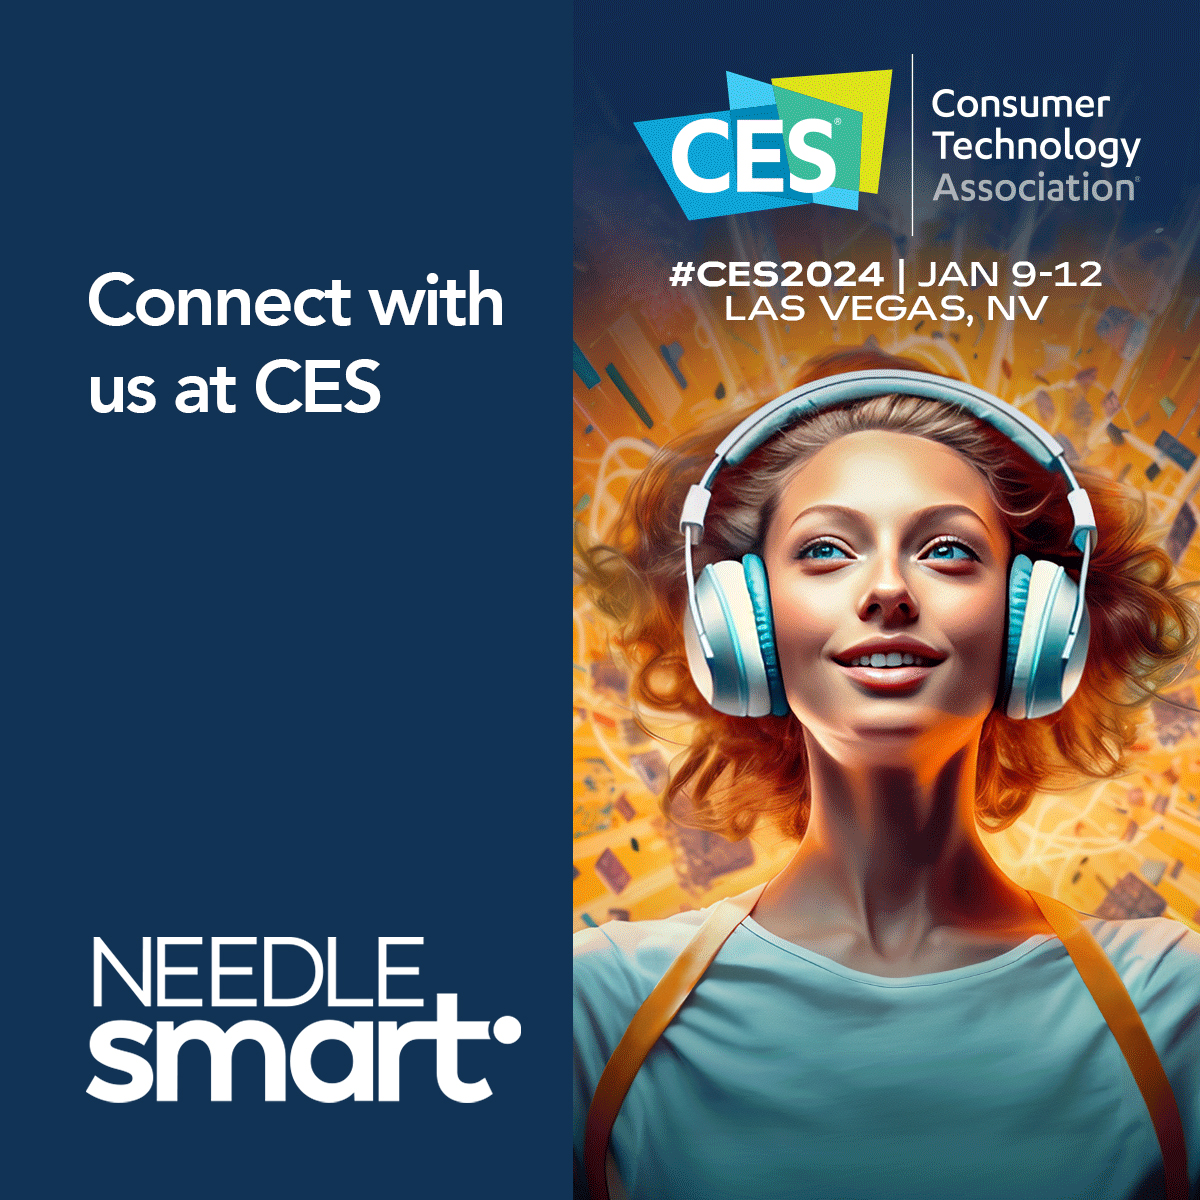 #ces2024 is happening in 20 days. NeedleSmart looks forward to connecting with partners and colleagues in #LasVegas next month. Want to learn more? We have a few select spots open. calendly.com/d/5dq-rj6-82z